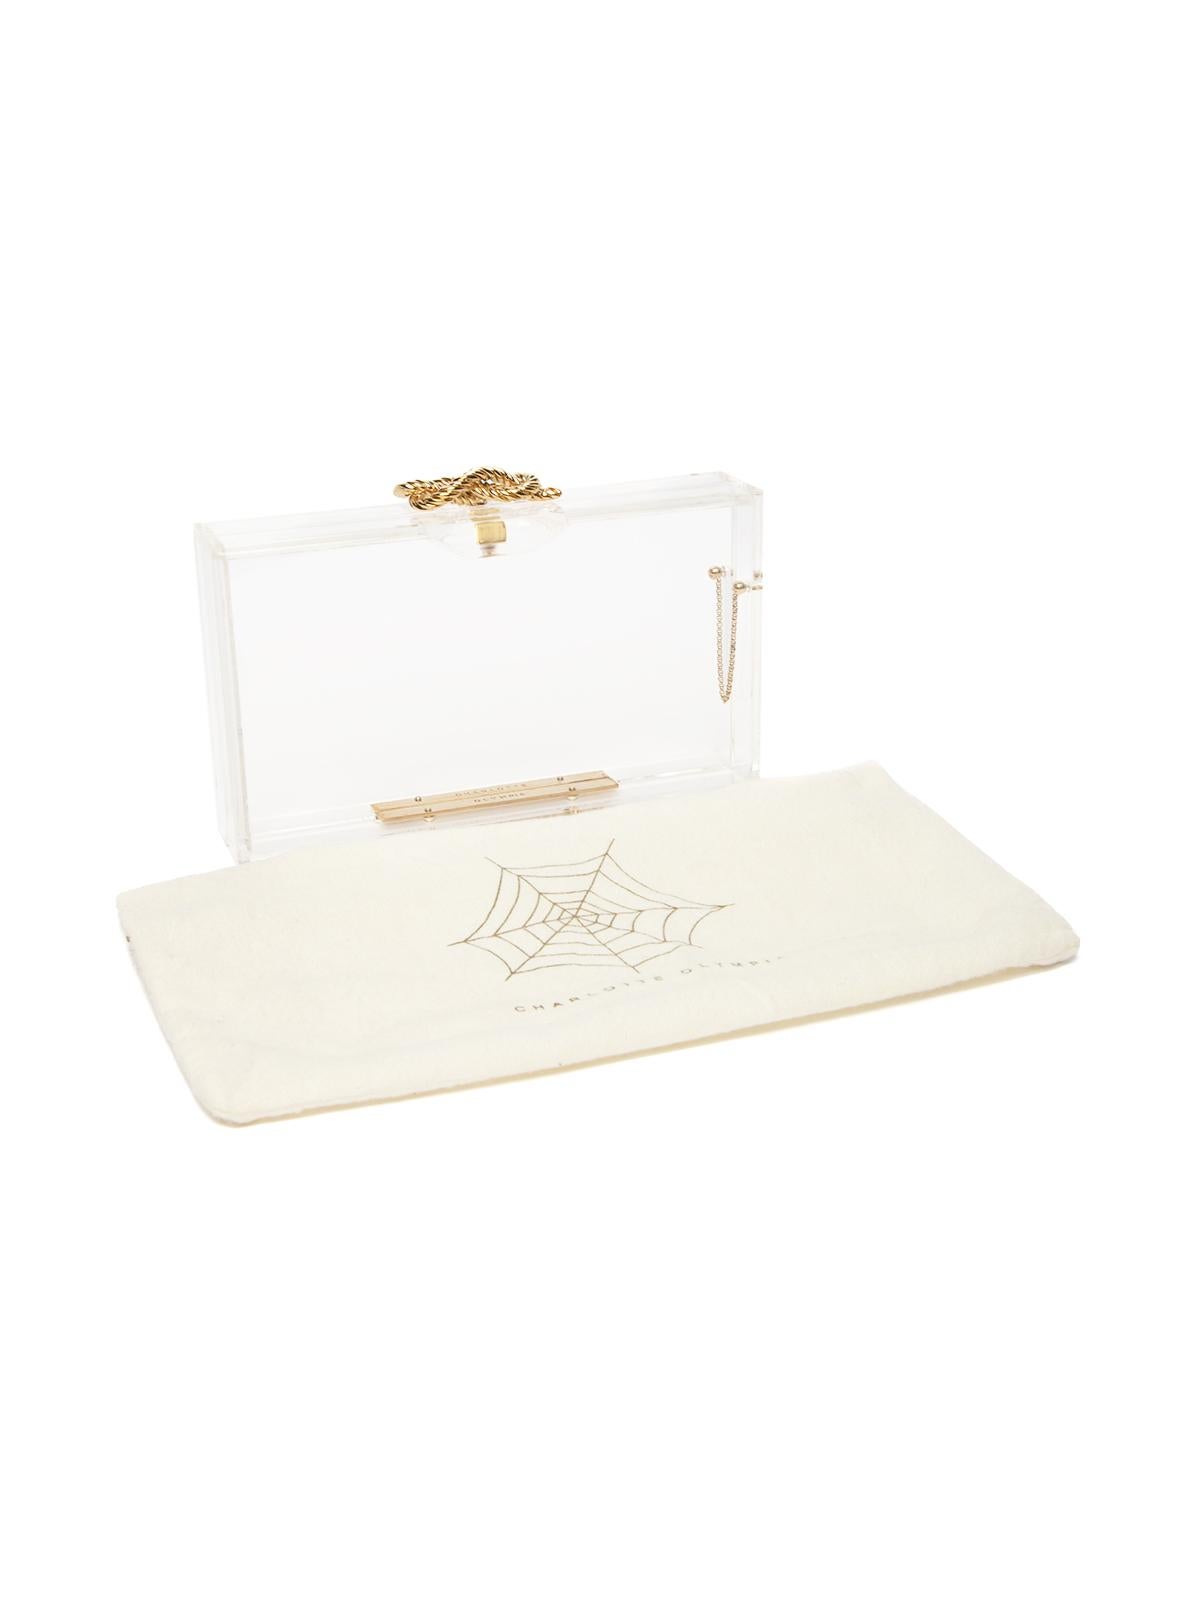 Pre-Loved Charlotte Olympia Women's Clear Box Clutch Bag 1